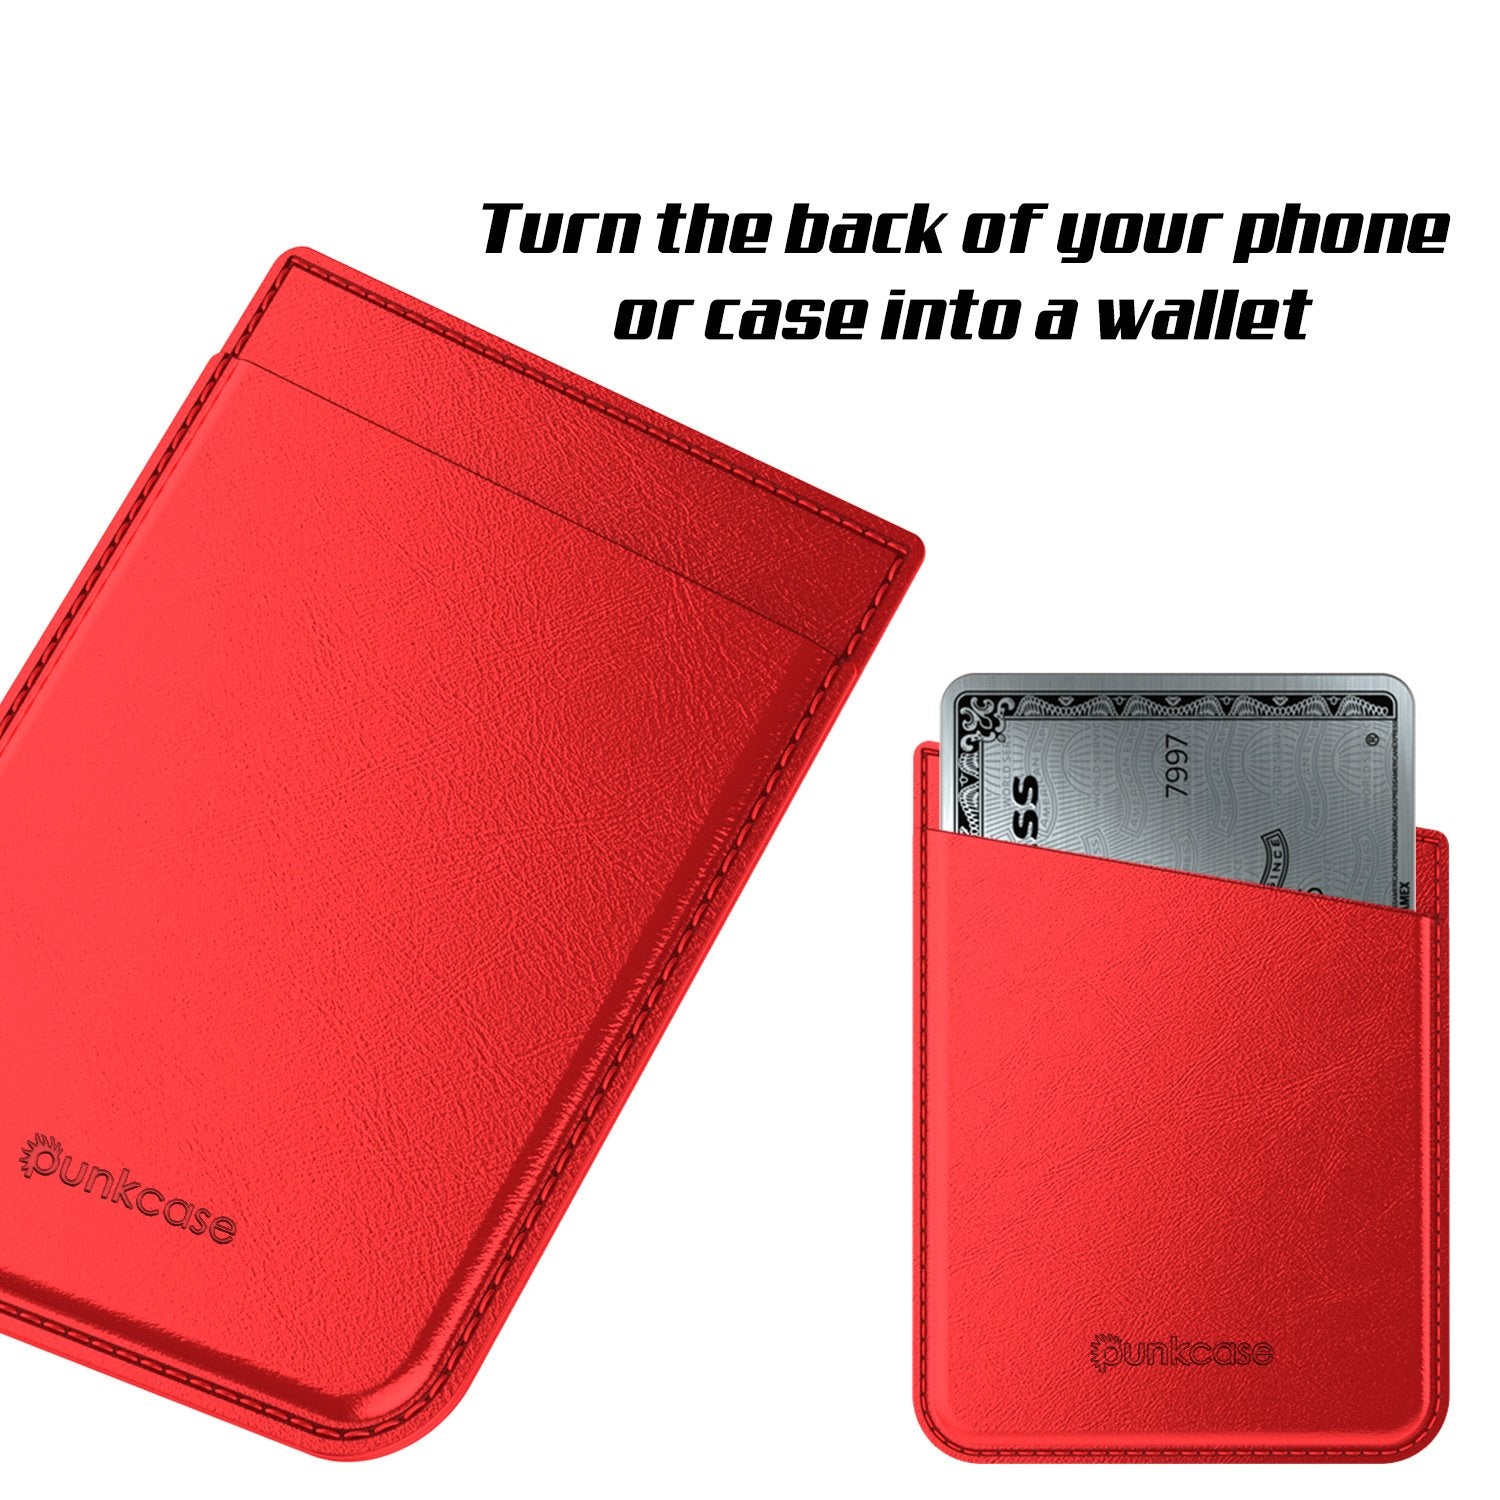 PunkCase CardStud Deluxe Stick On Wallet | Adhesive Card Holder Attachment for Back of iPhone, Android & More | Leather Pouch | [Red] - PunkCase NZ